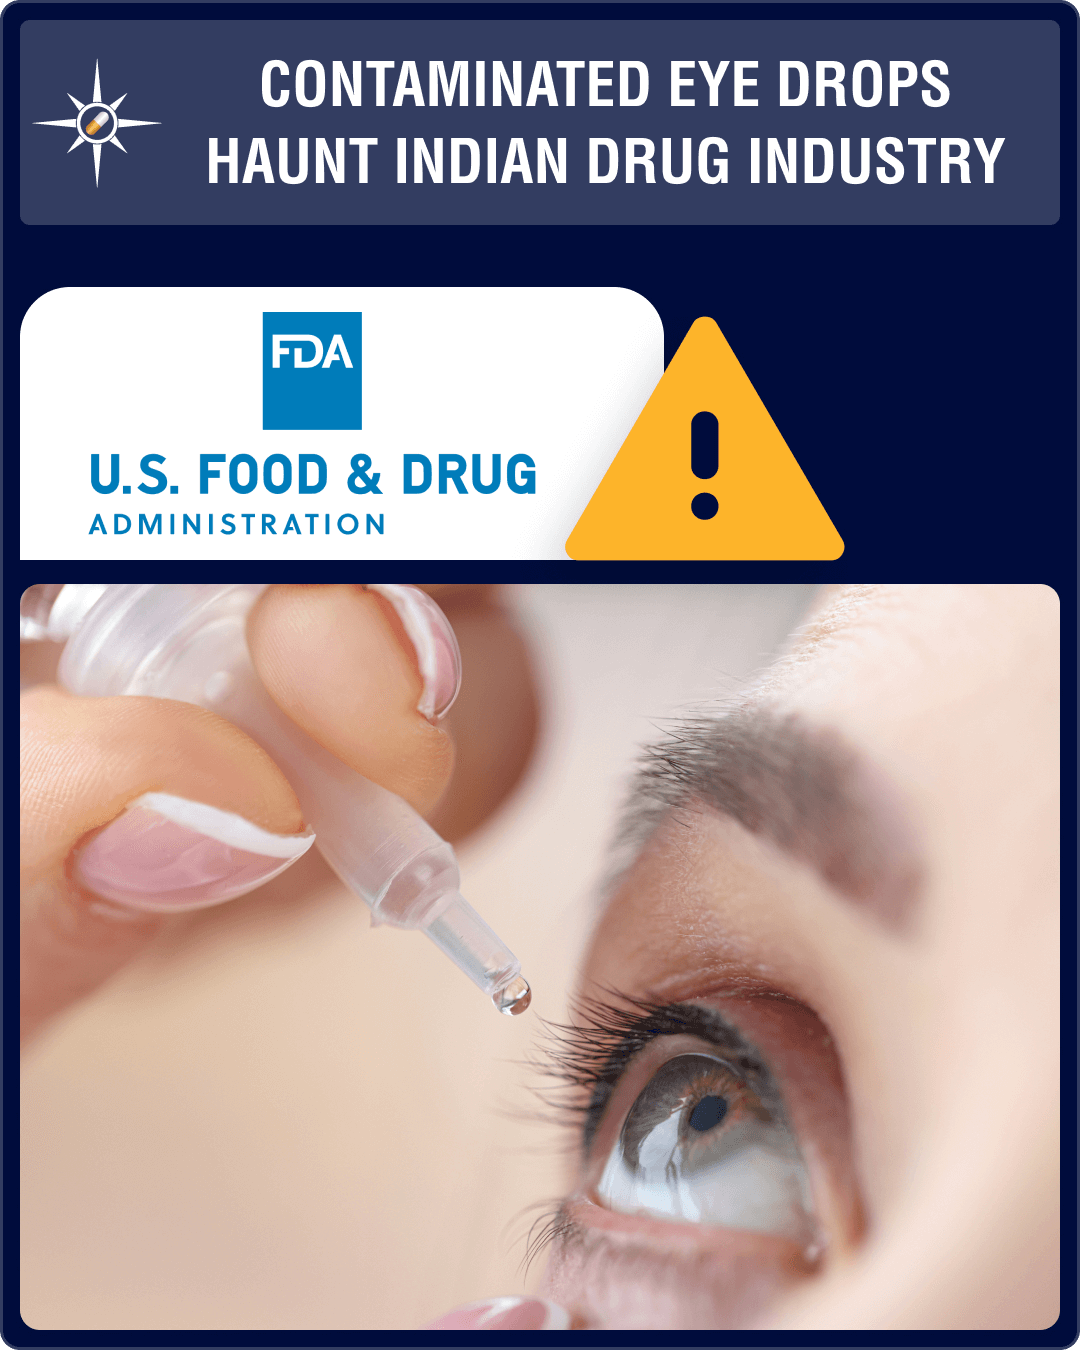 After cough syrup deaths, contaminated eye drops haunt Indian drug industry